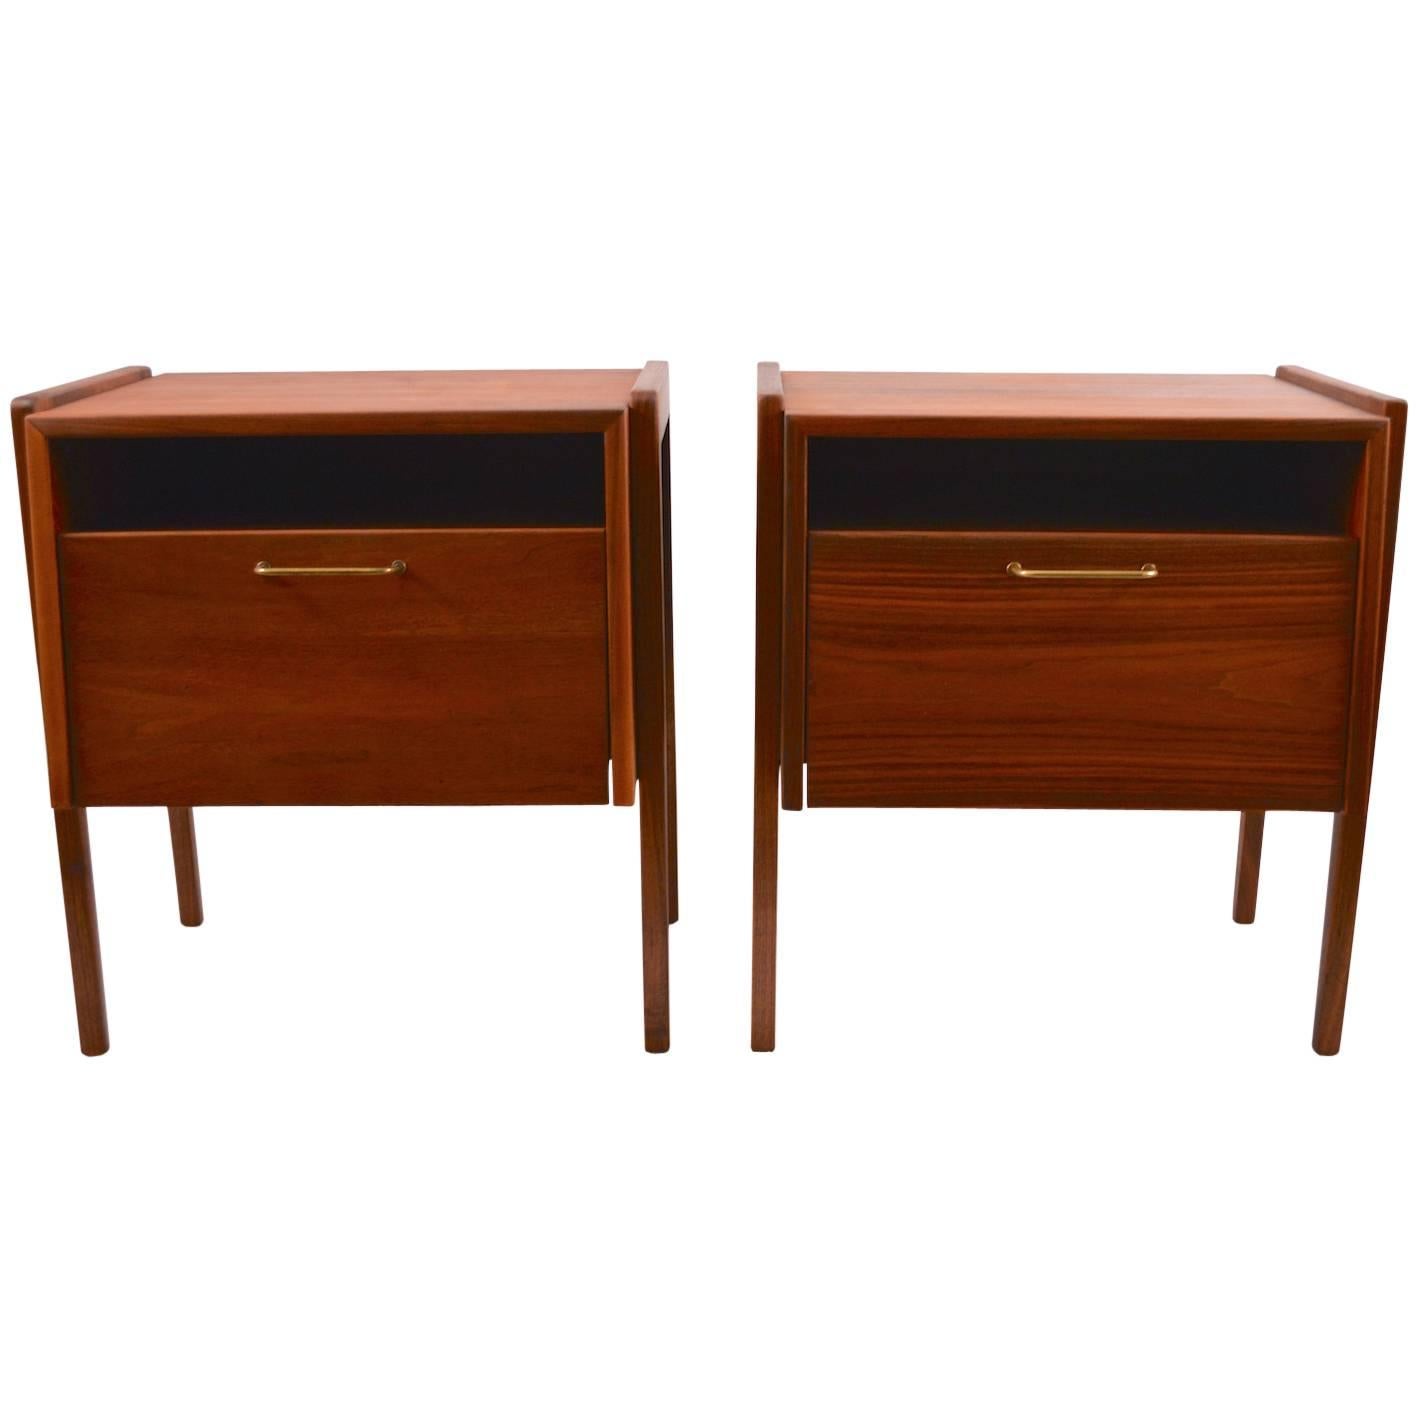 Pair of Jens Risom Nightstand End Tables